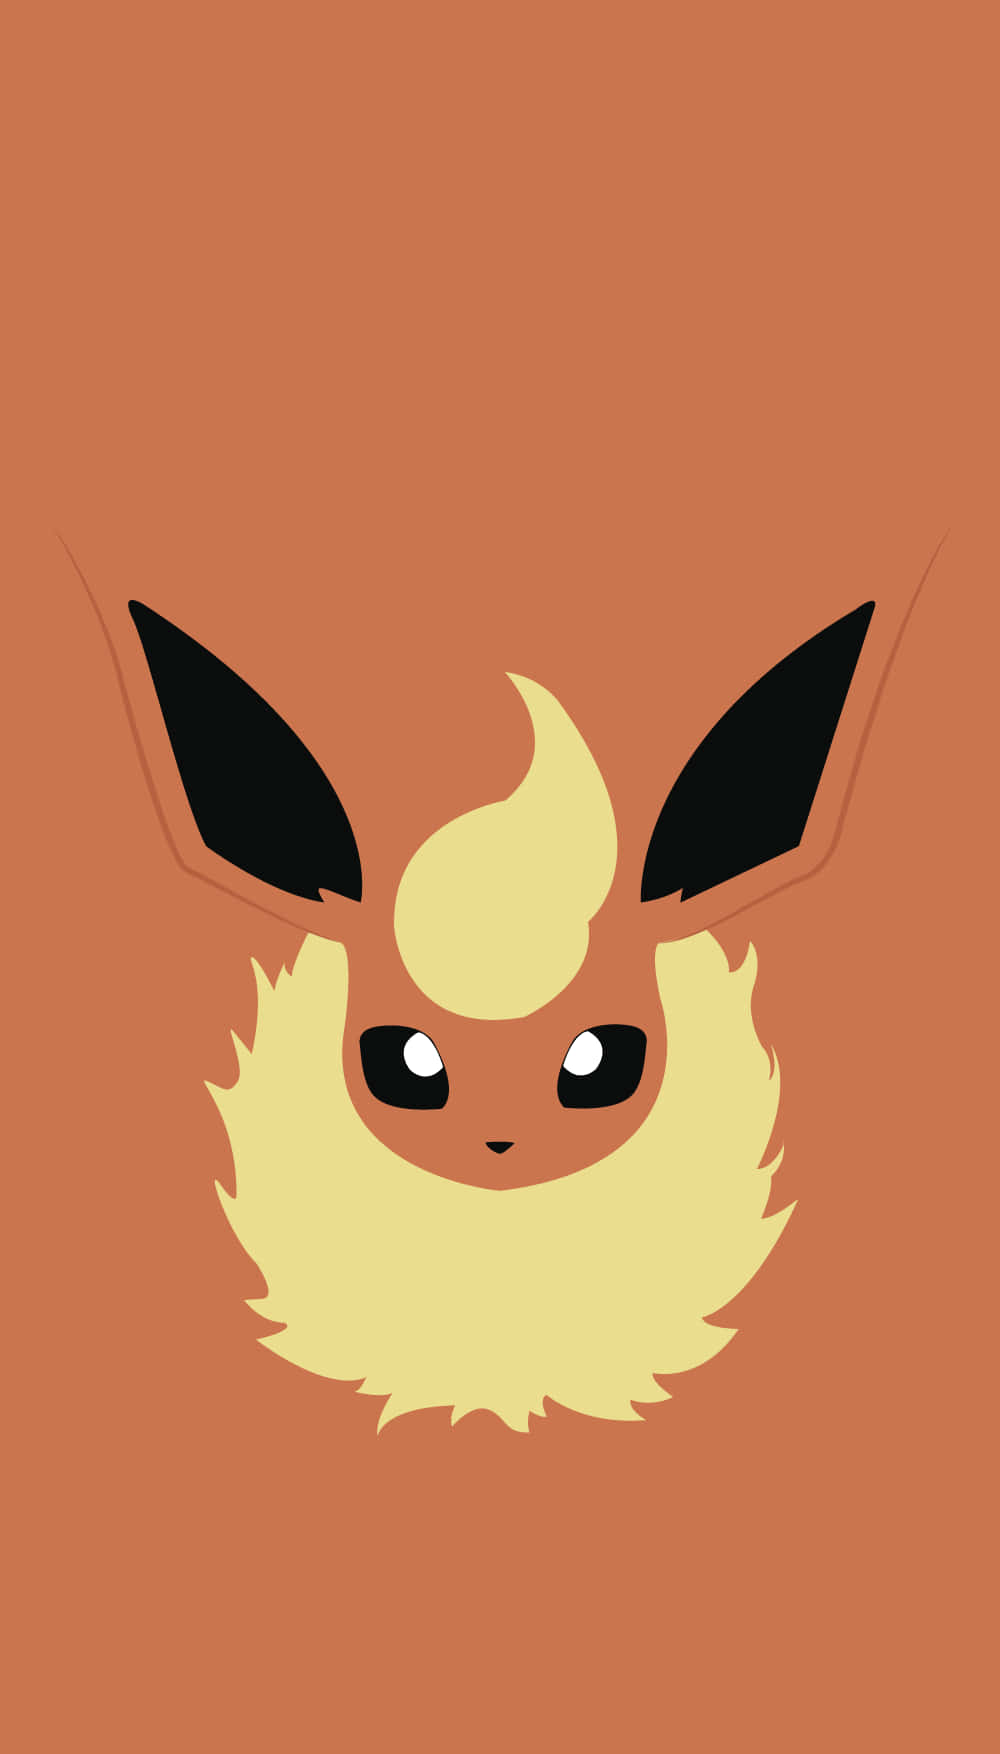 Cute Eevee Ready to Take on the World! Wallpaper